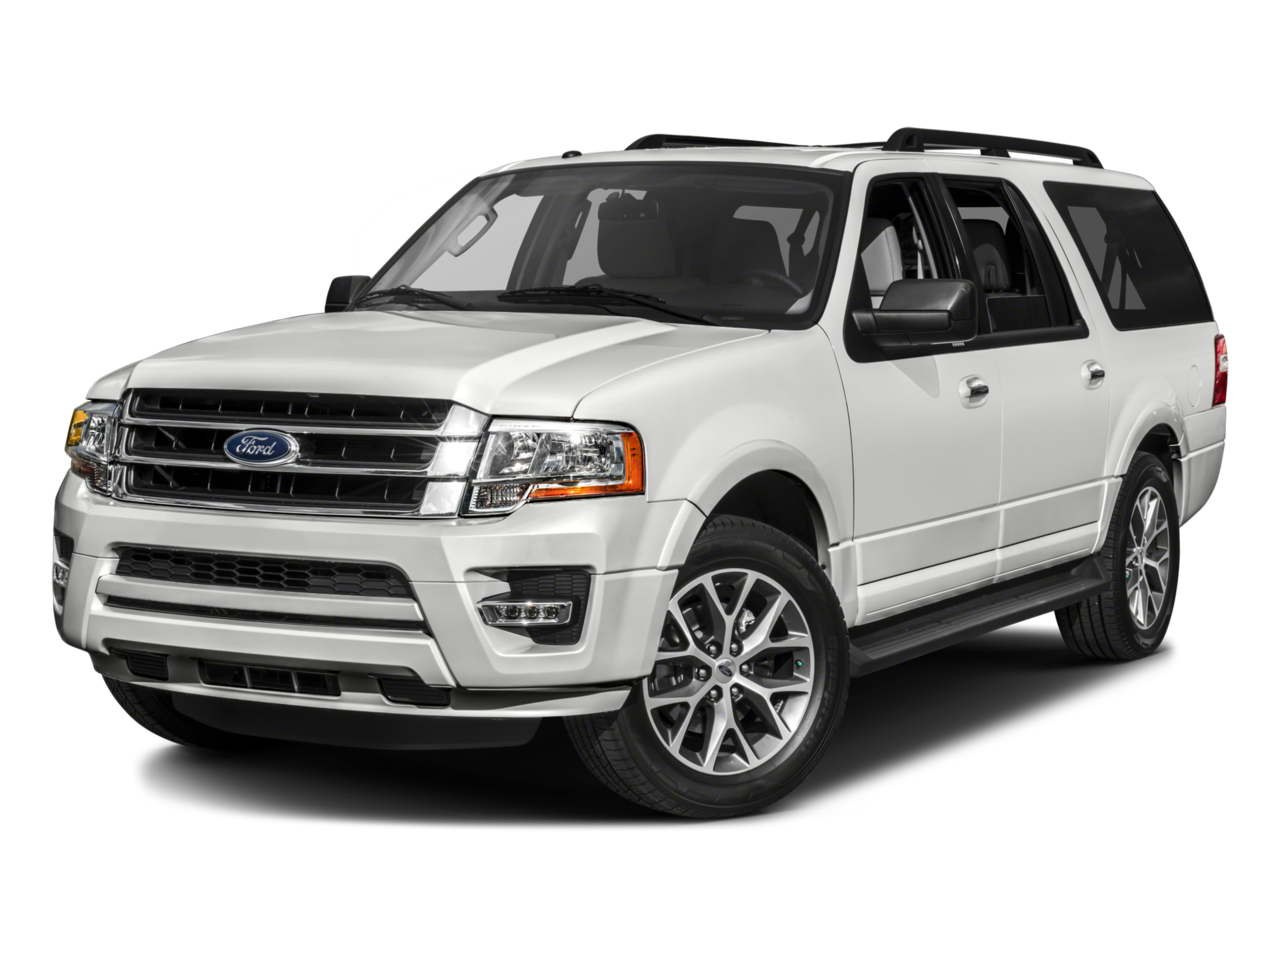 Don’t Ignore Recalls! Check Your 2017 Ford Expedition Recalls!